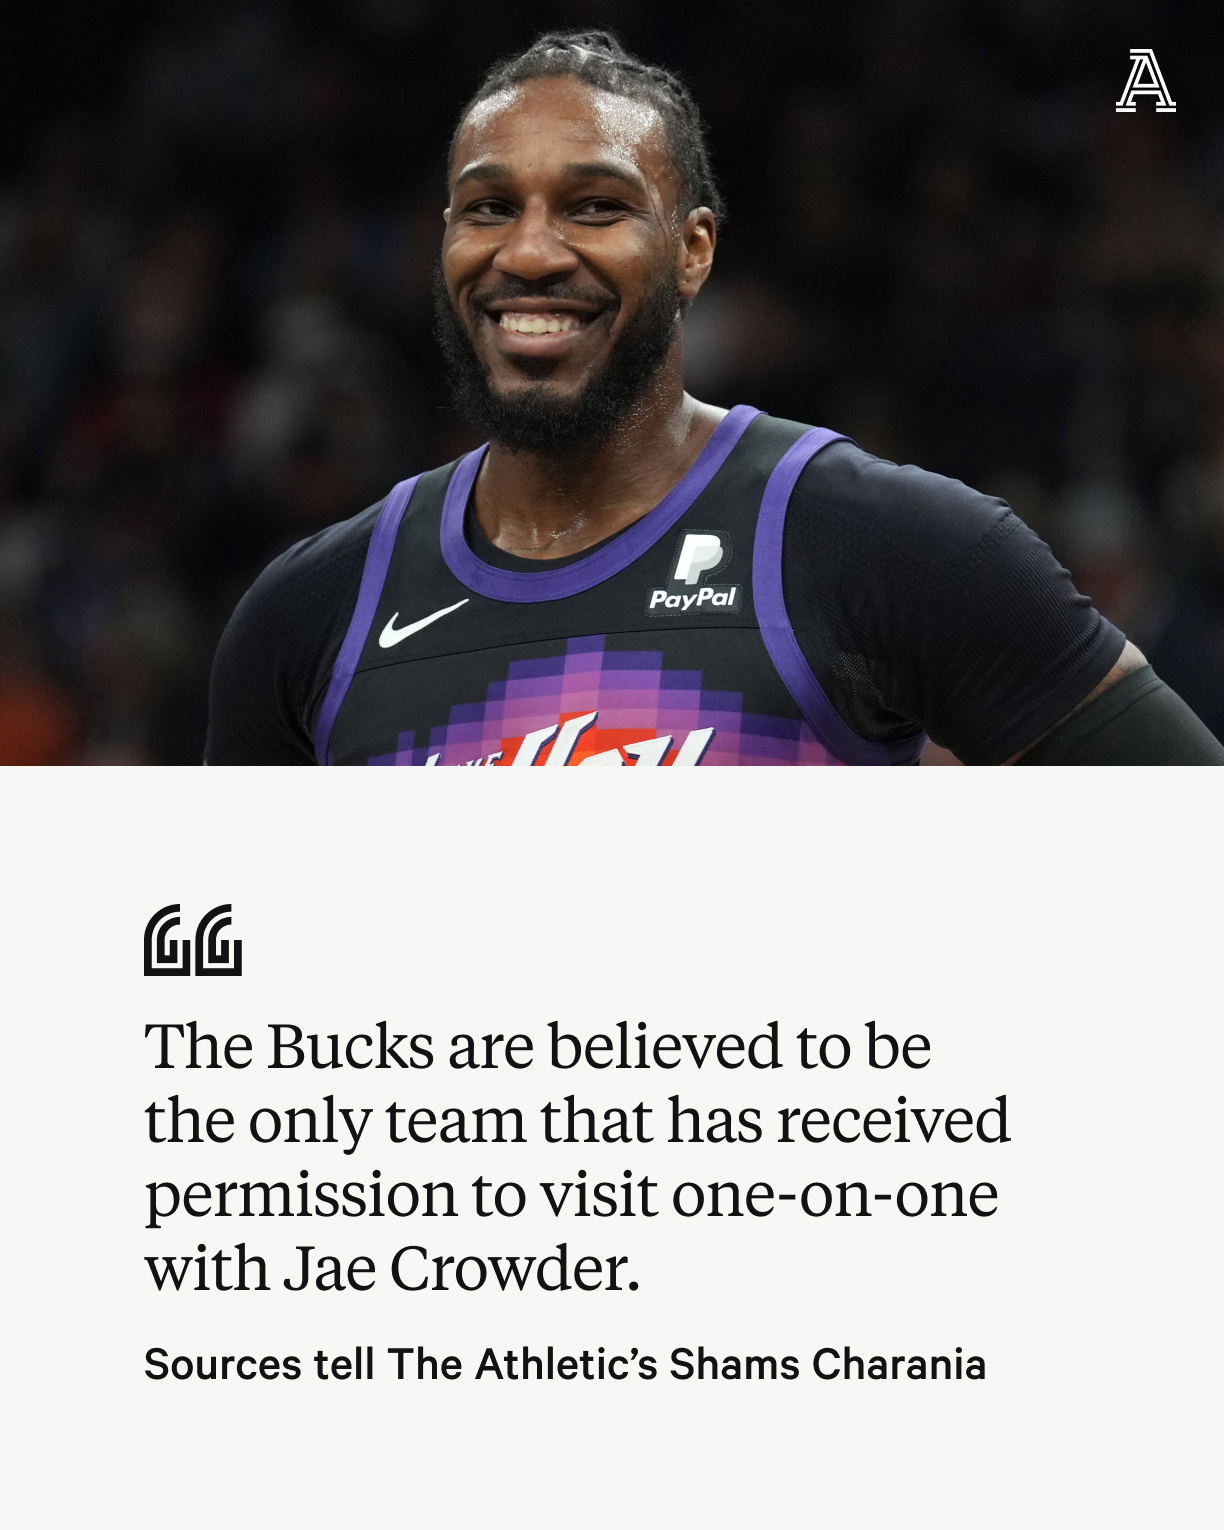 After 9 months away, Jae Crowder is ready to return to floor and chase a  title with Bucks - The Athletic